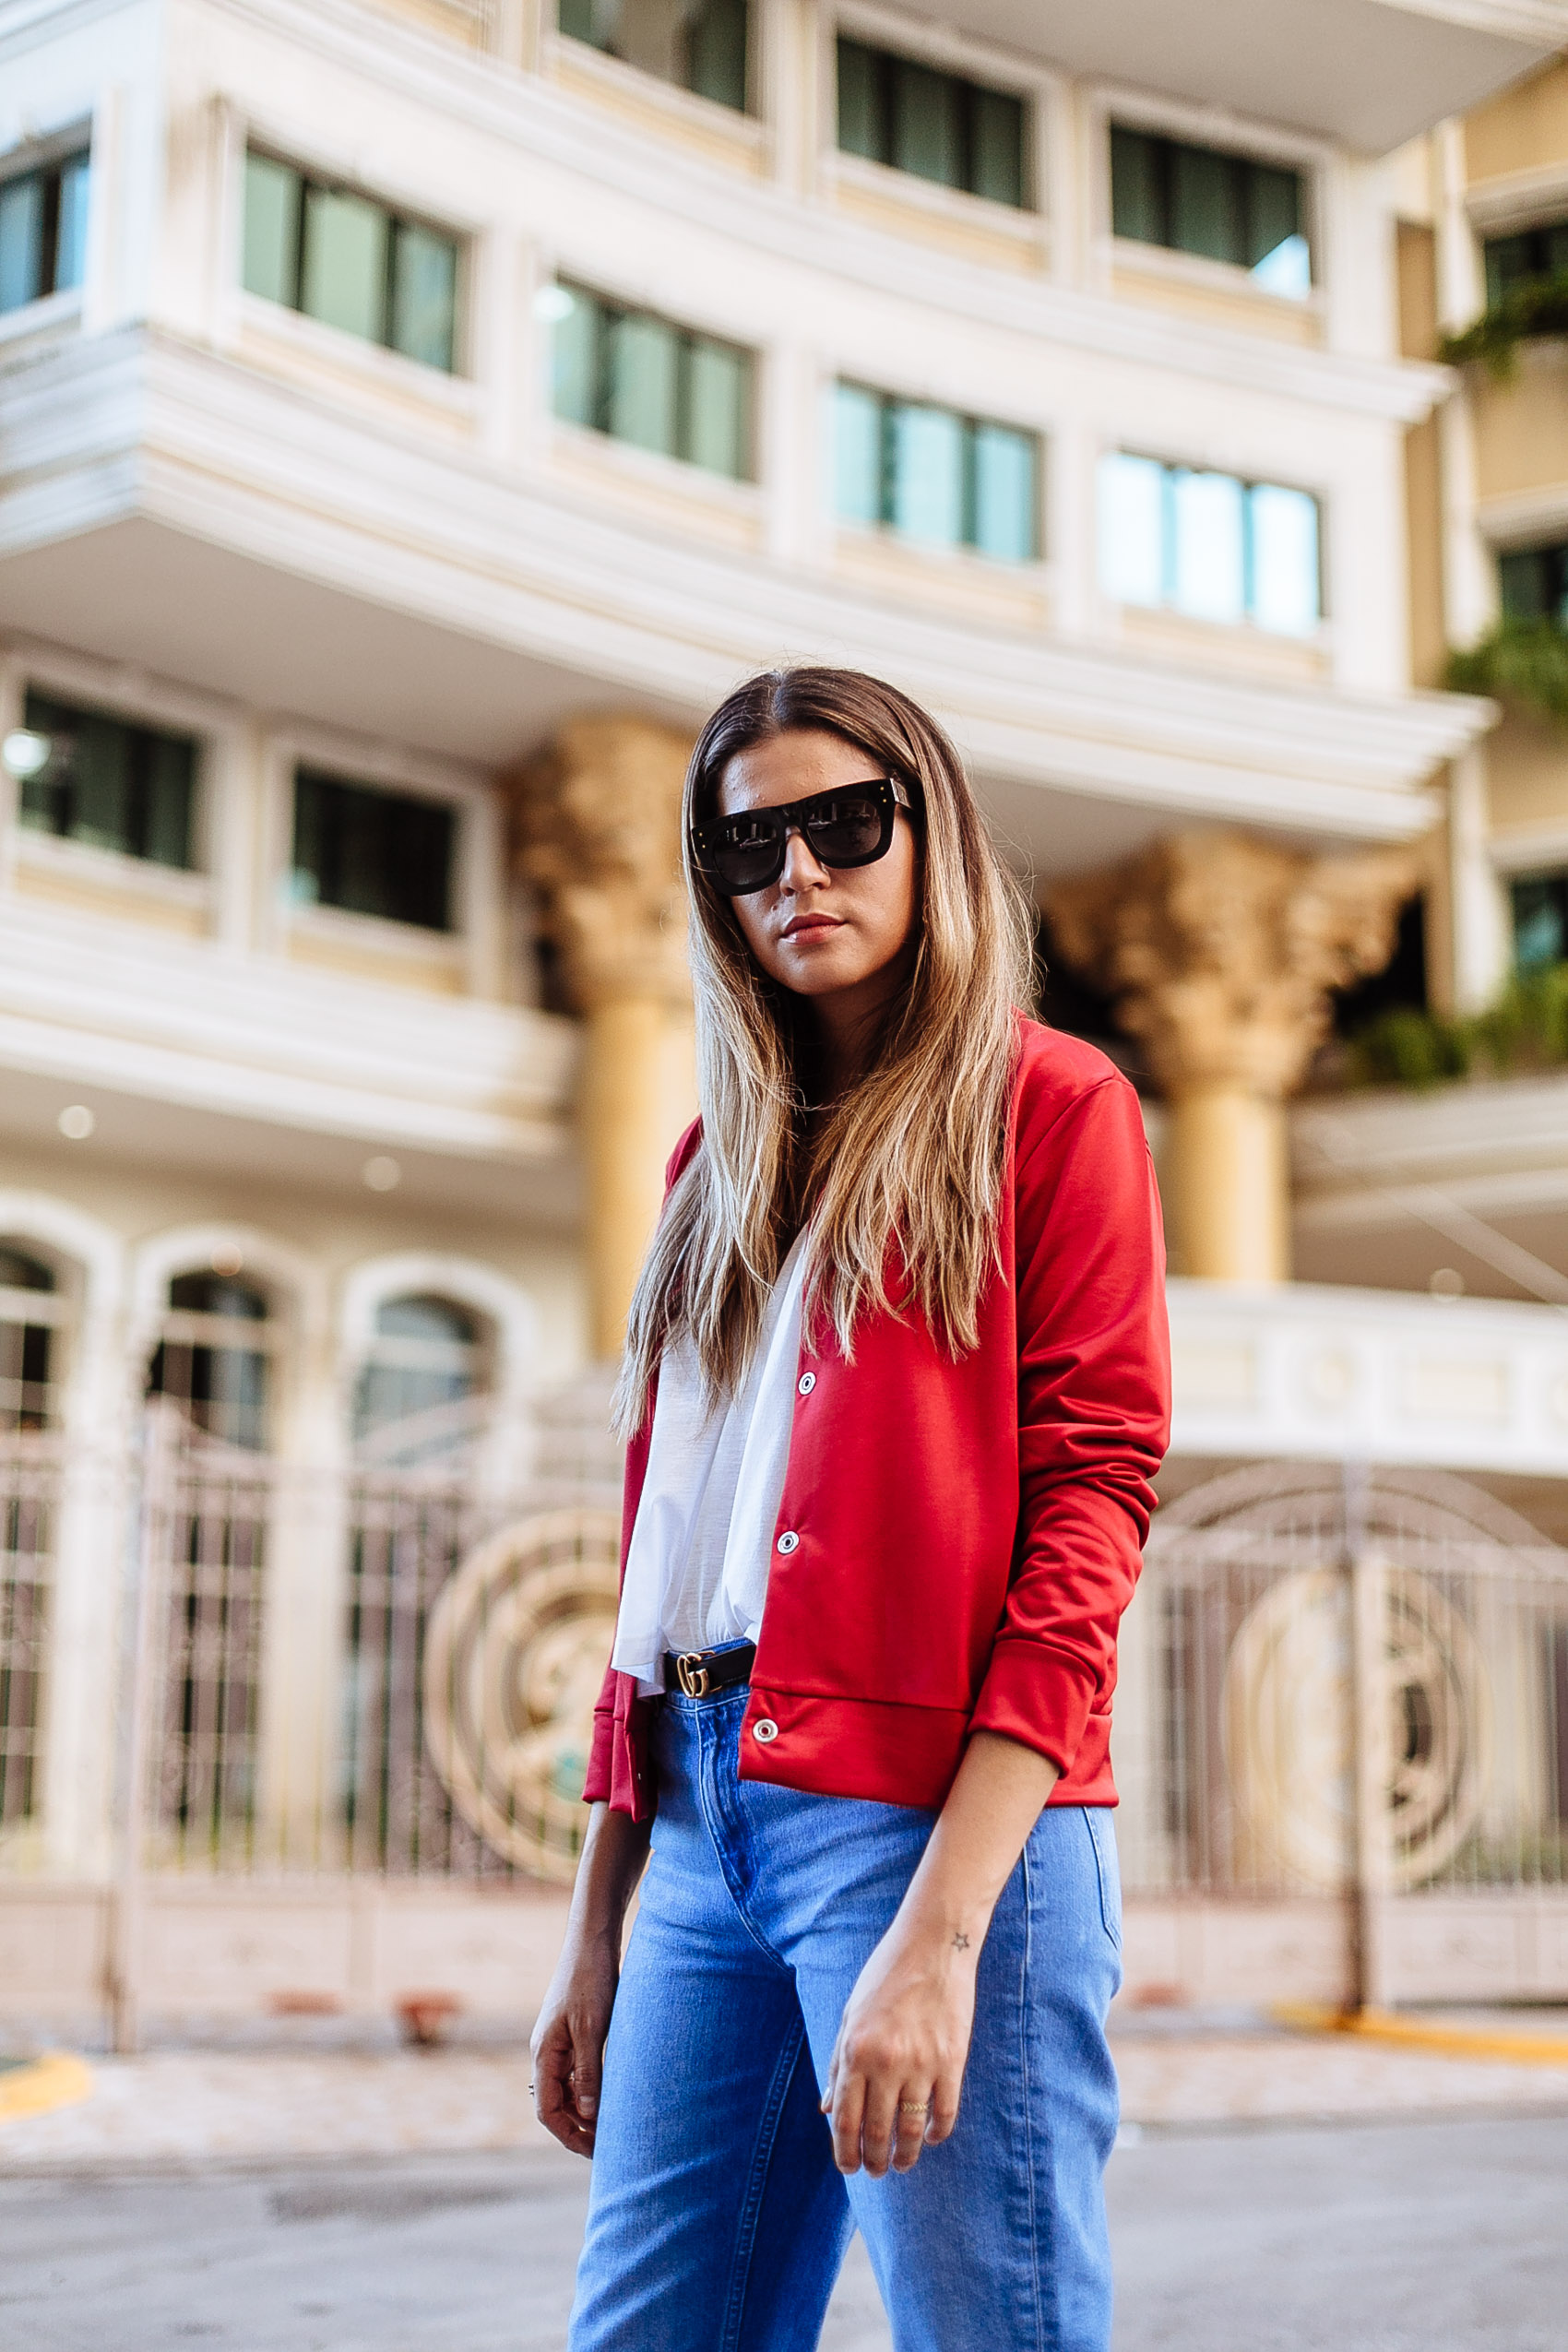 Blogger Maristella Gonzalez wearing a red satin jacket, white tank top, jeans and Gucci belt